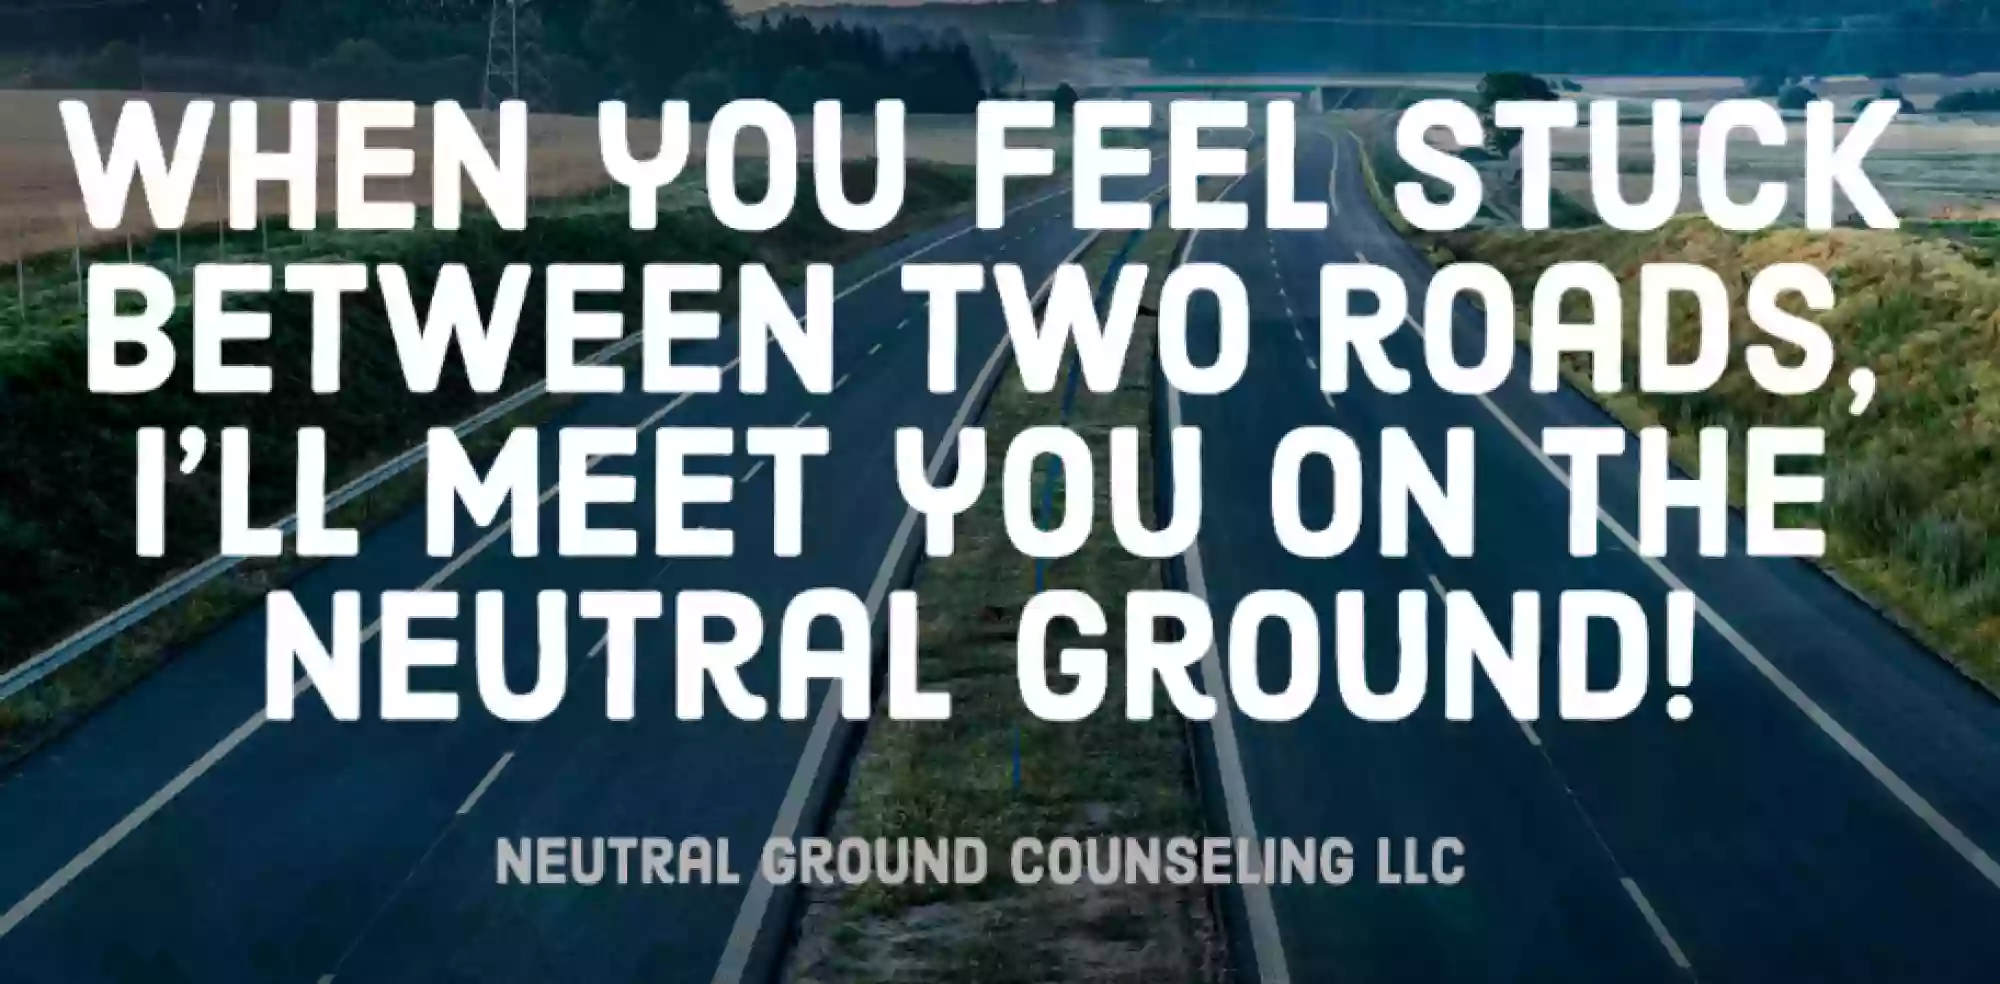 Neutral Ground Counseling LLC (Chalmette)